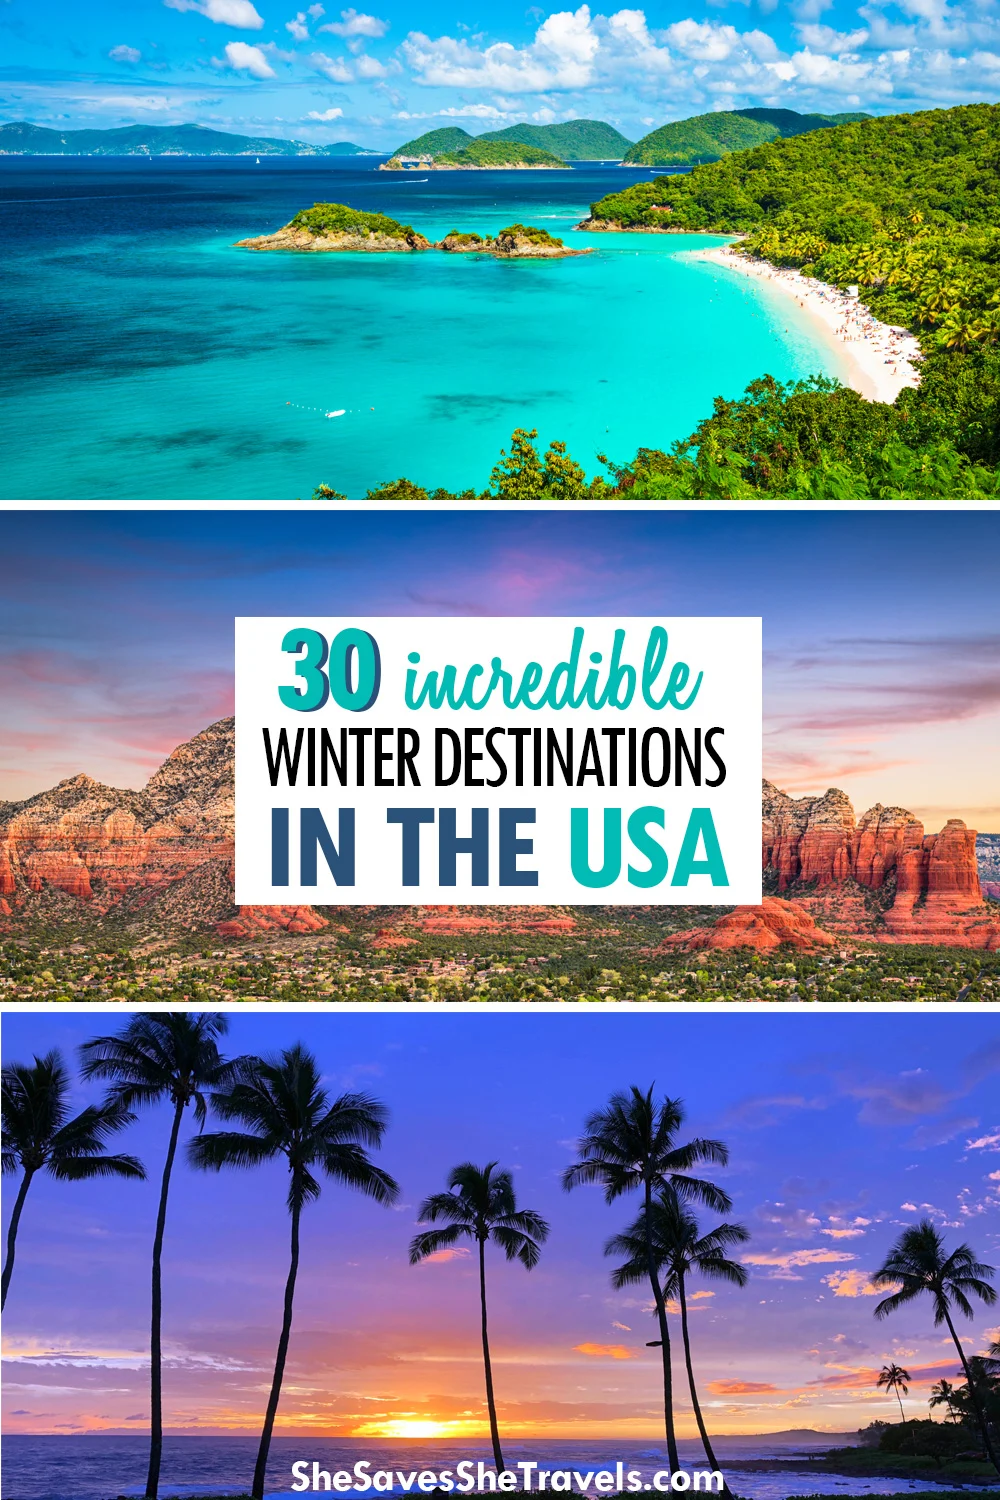 30 incredible winter destinations in the usa